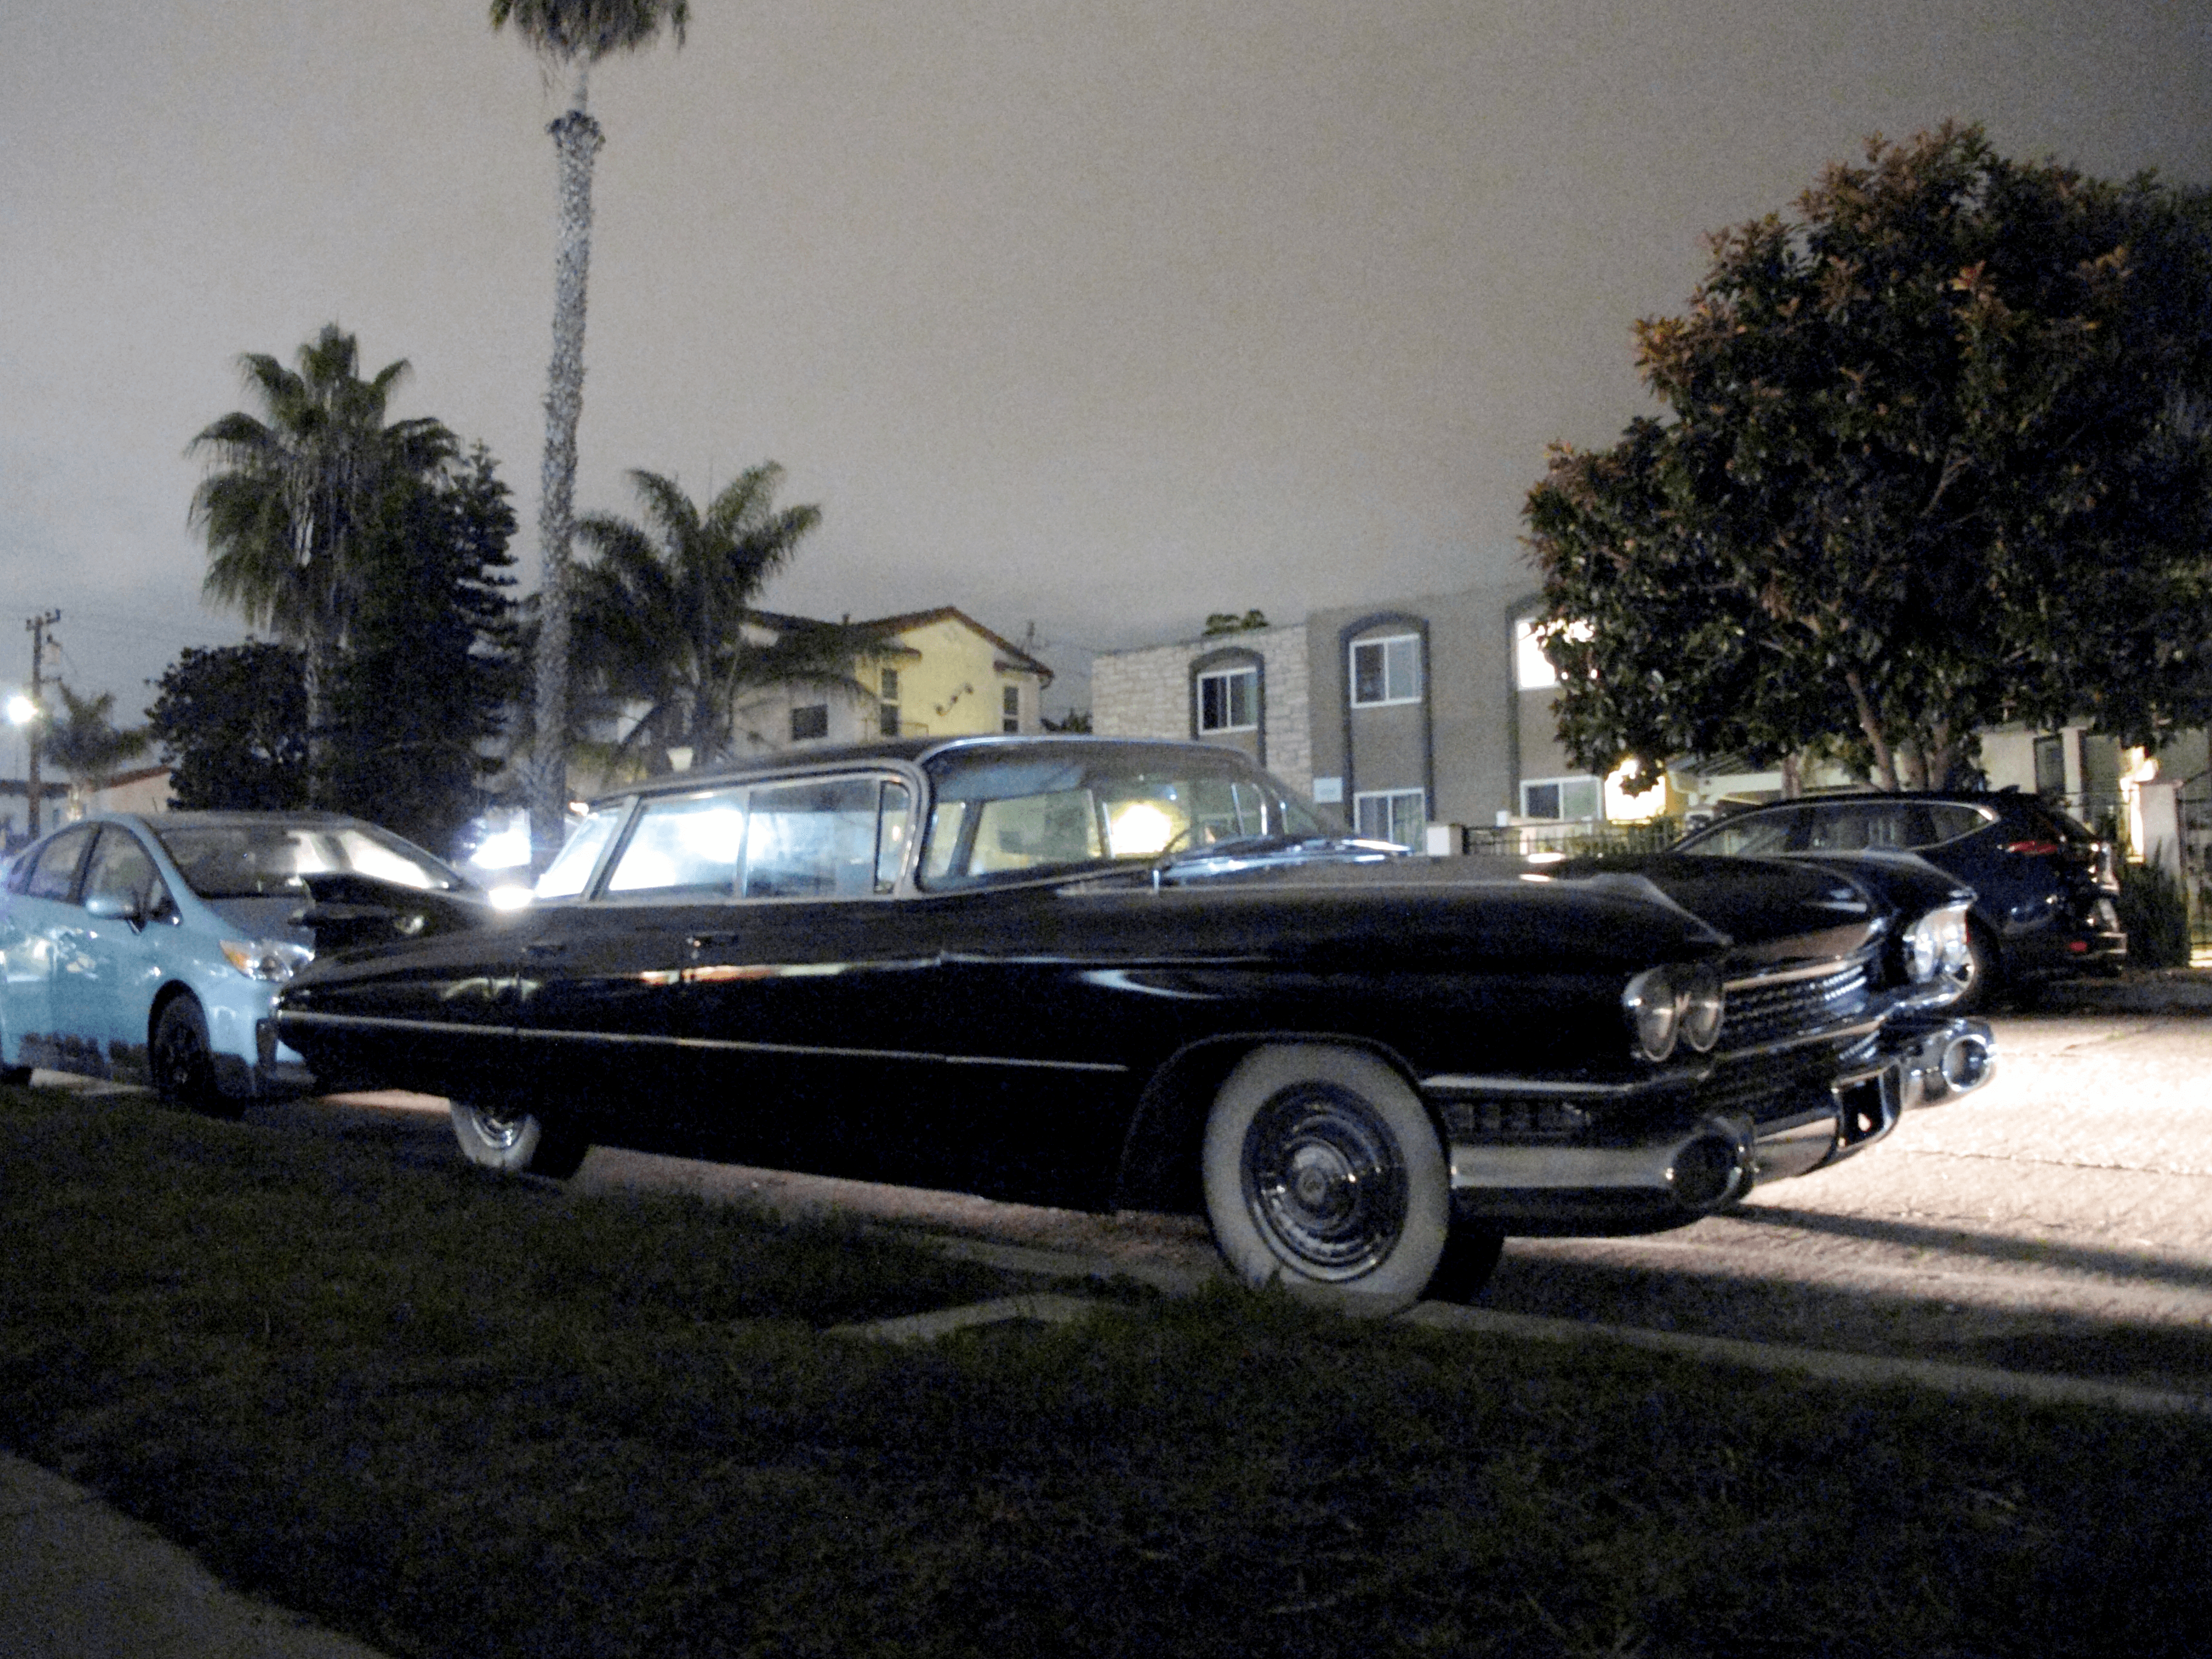 Vintage Cadillac timed exposure night shot - phot by BTVG